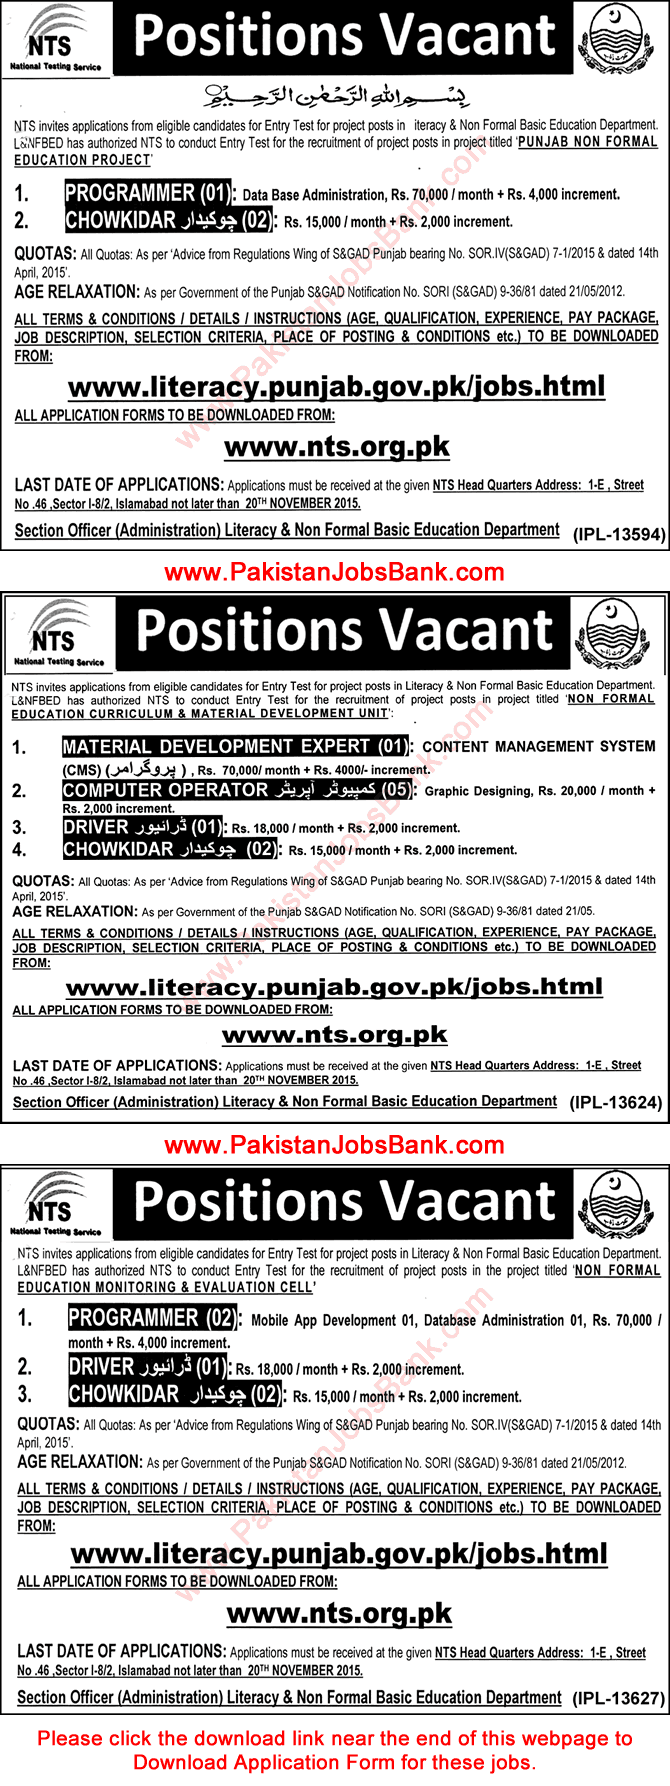 Literacy & Non Formal Basic Education Department Punjab Jobs 2015 October NTS Application Form Download